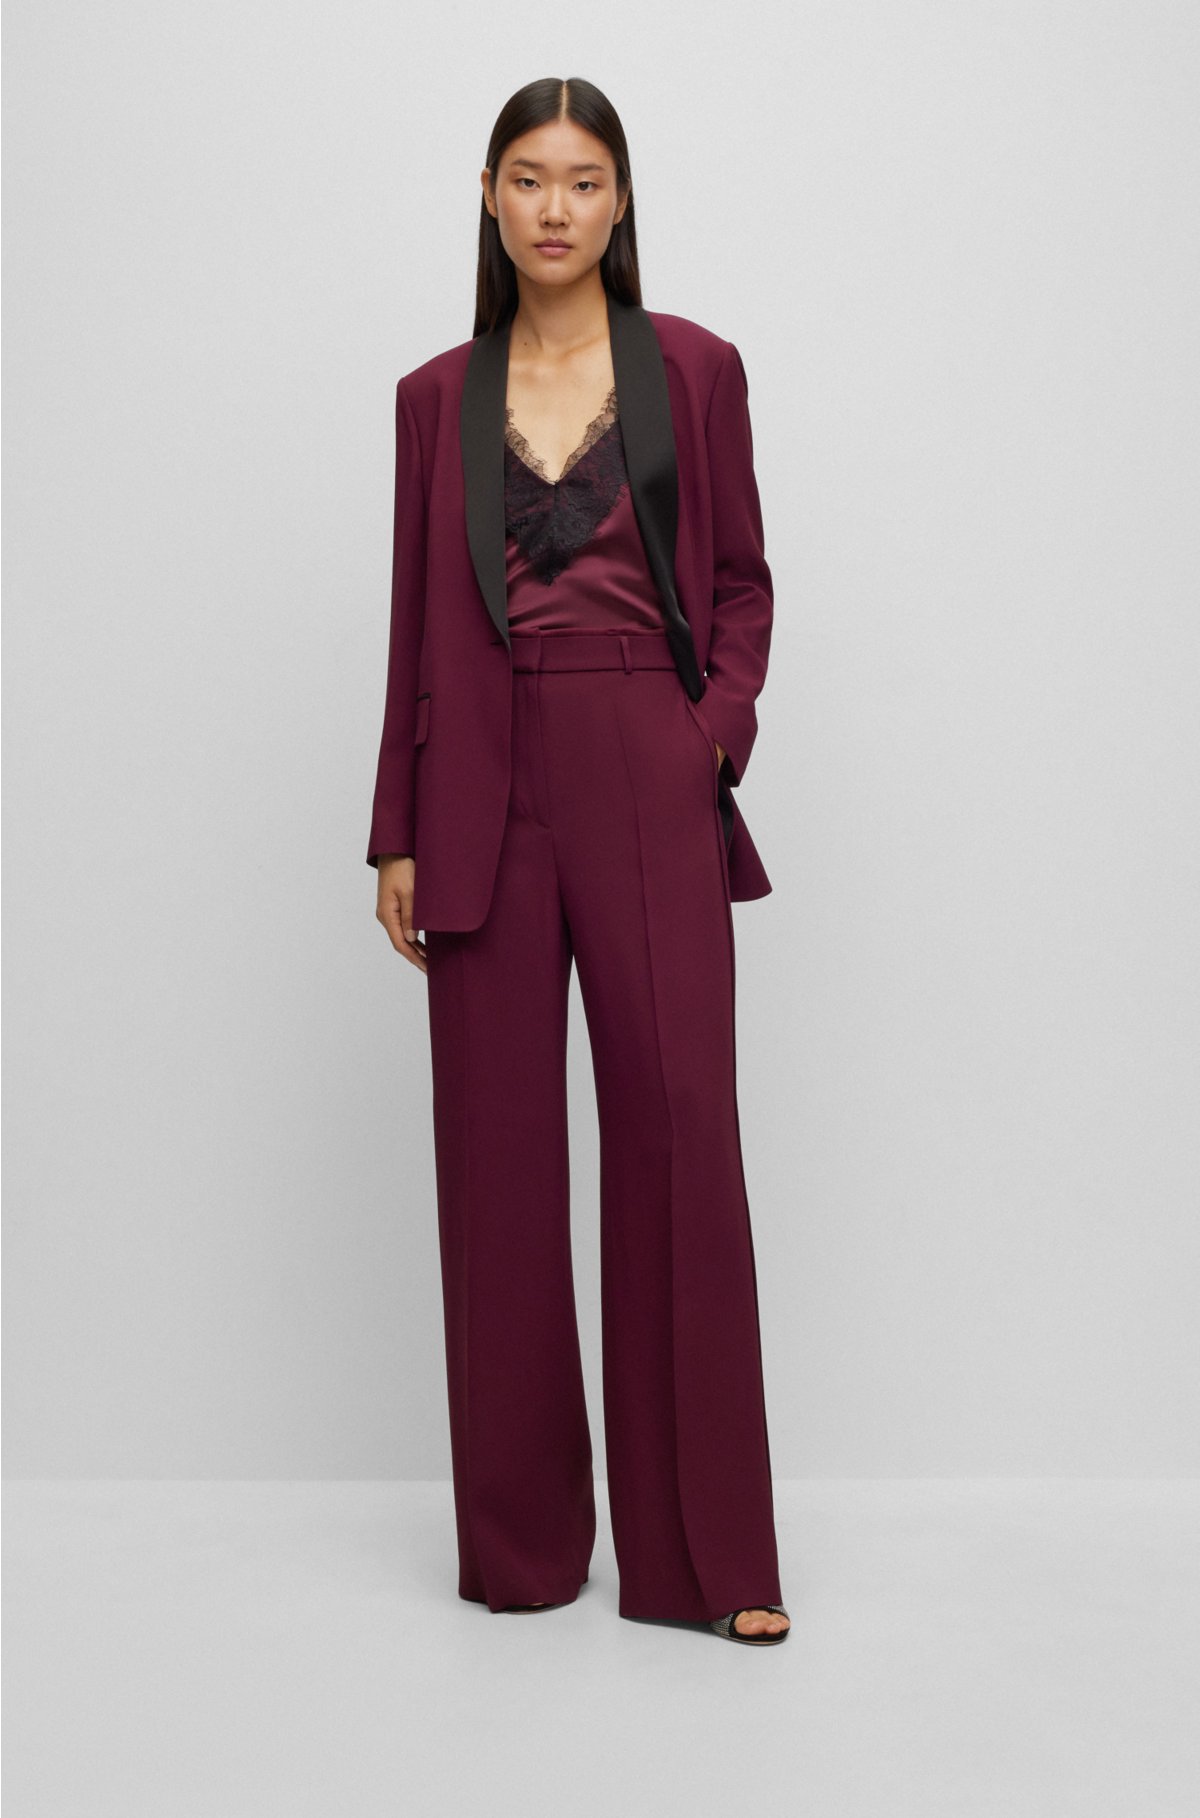 Women's Red Trousers, Dark Red & Maroon Trousers